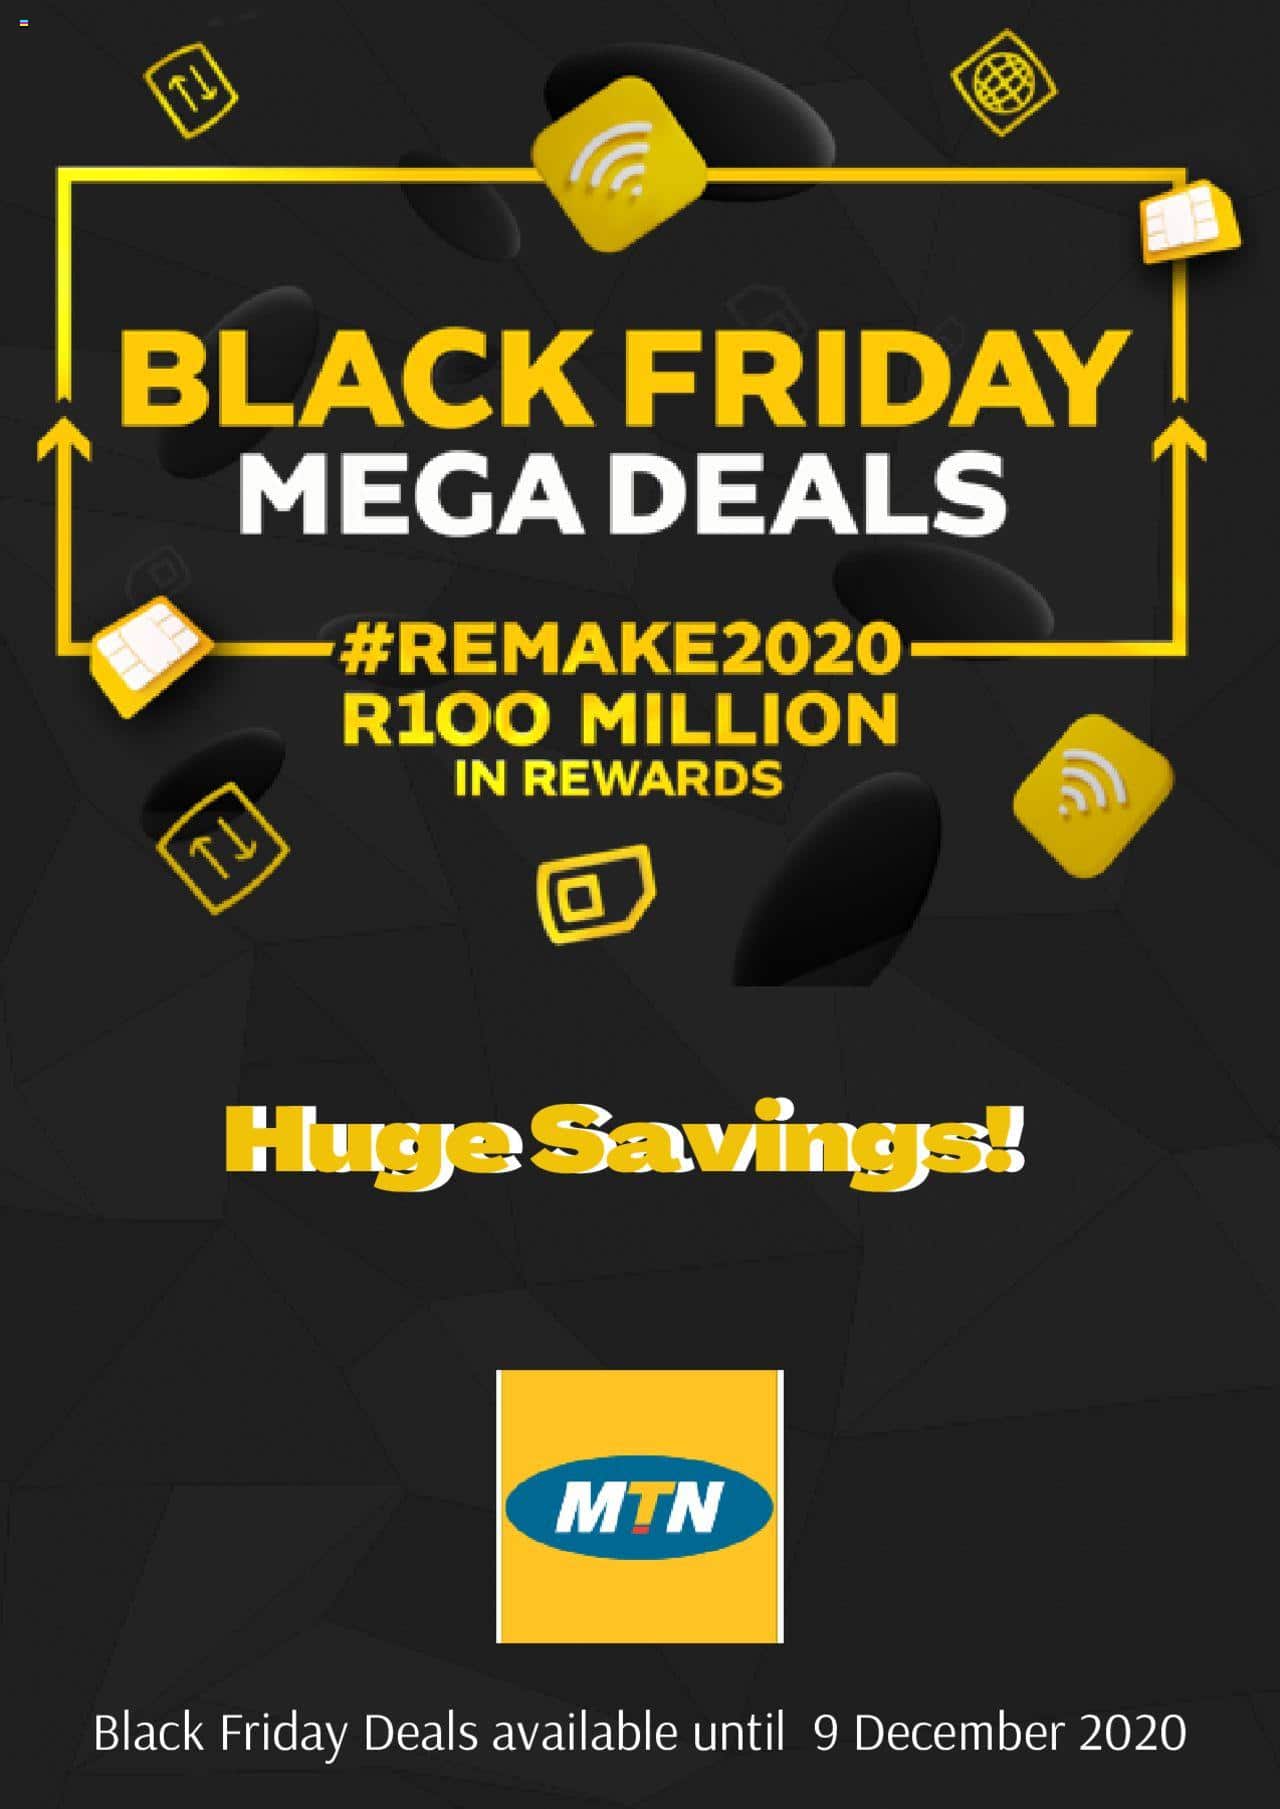 MTN Black Friday Deals & Specials 2021 - Will There Ve More Black Friday Deals